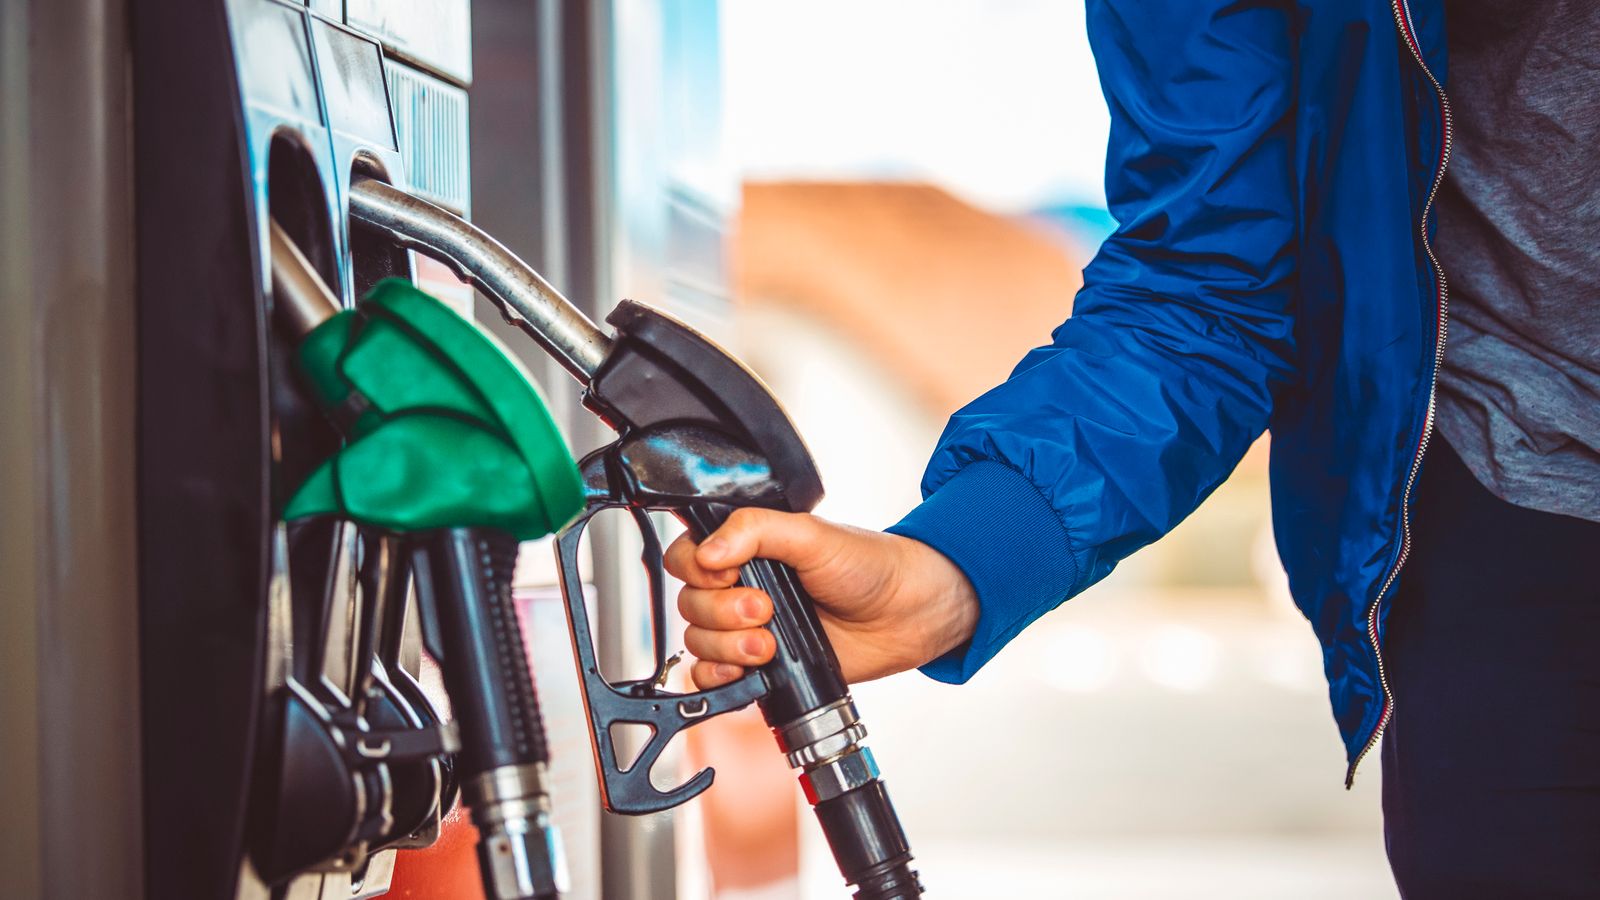 Fuel retailers forced to share price changes within 30 minutes under Pumpwatch plan